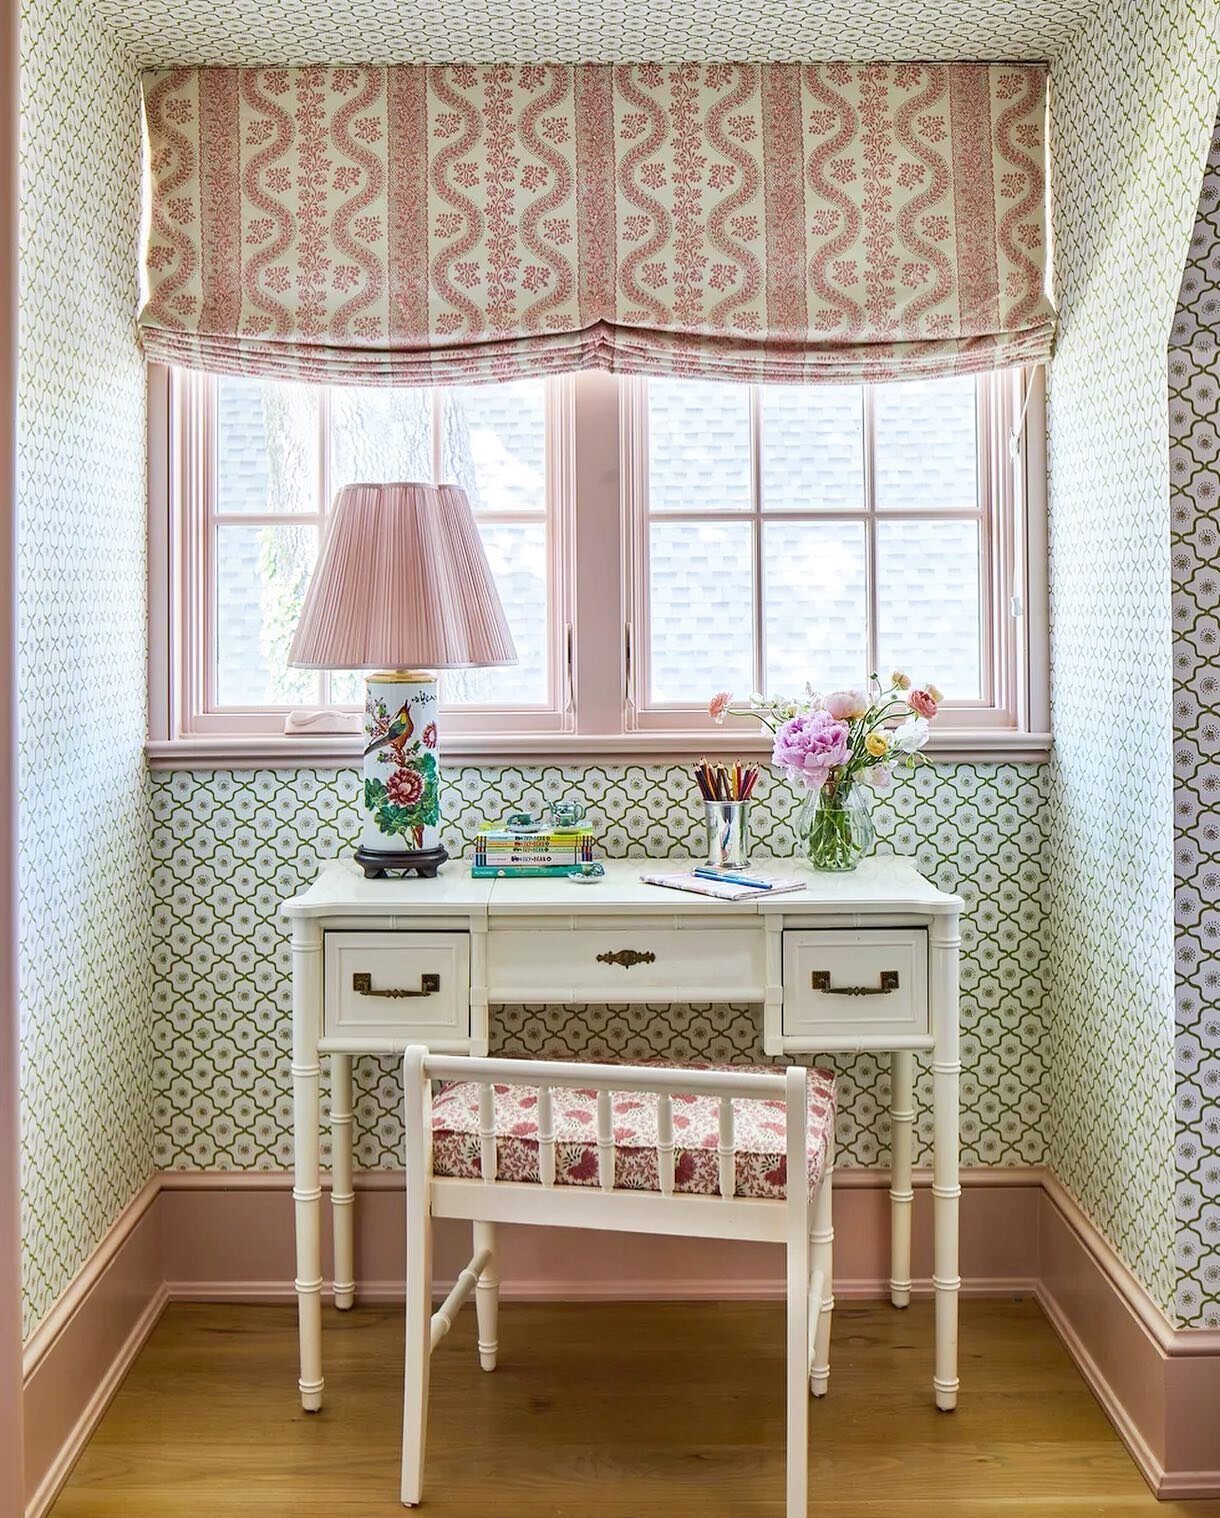 This extra special little girl&rsquo;s bedroom nook in @janiejones1207 home as featured in @verandamag May/June 2022 issue.

📷 @laureywglenn